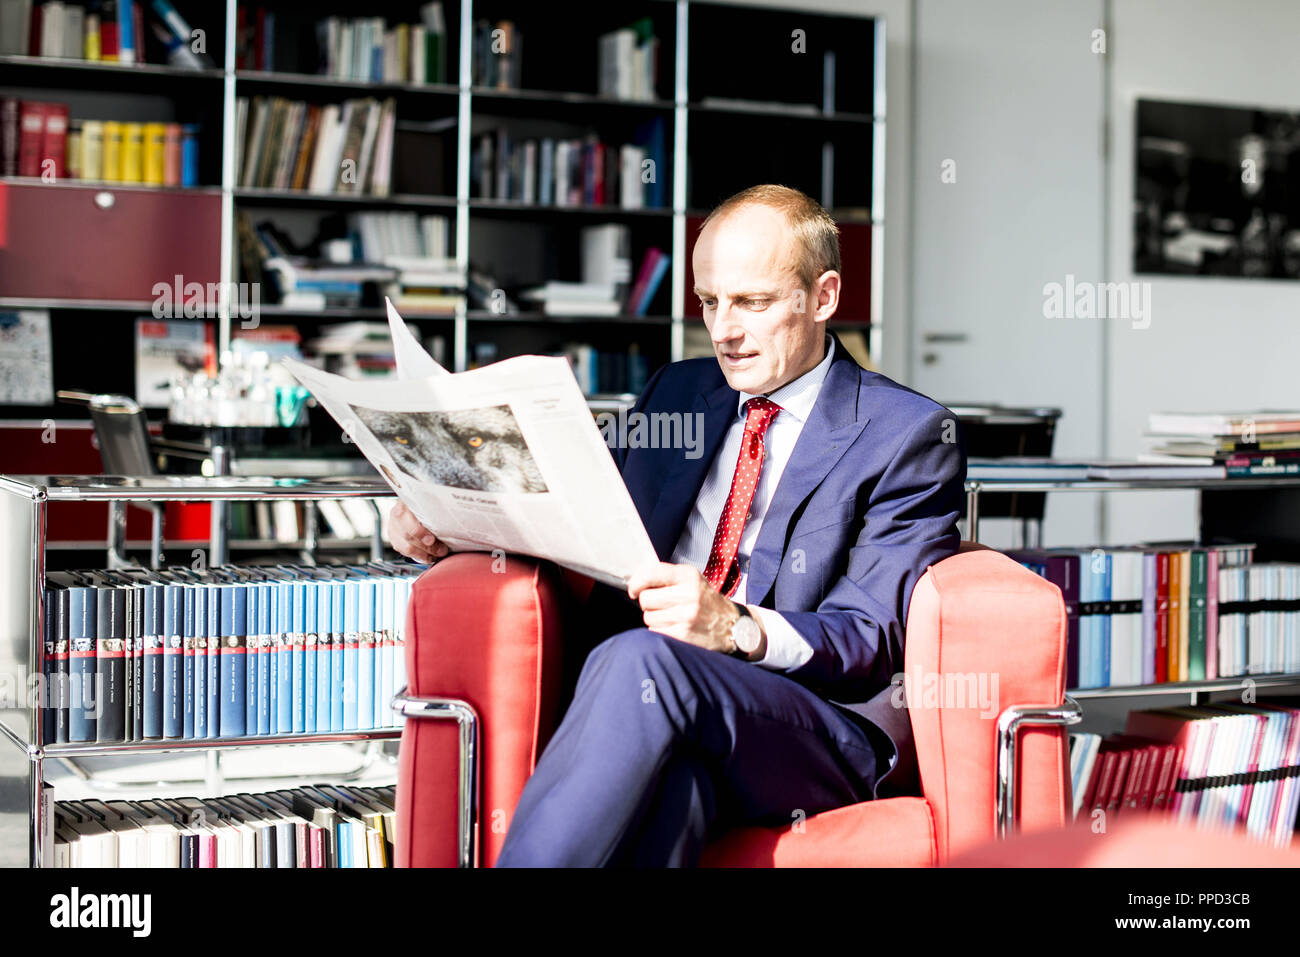 Wolfgang Krach, editor in chief of Sueddeutsche Zeitung, in his office in the publishing house in Munich. Stock Photo